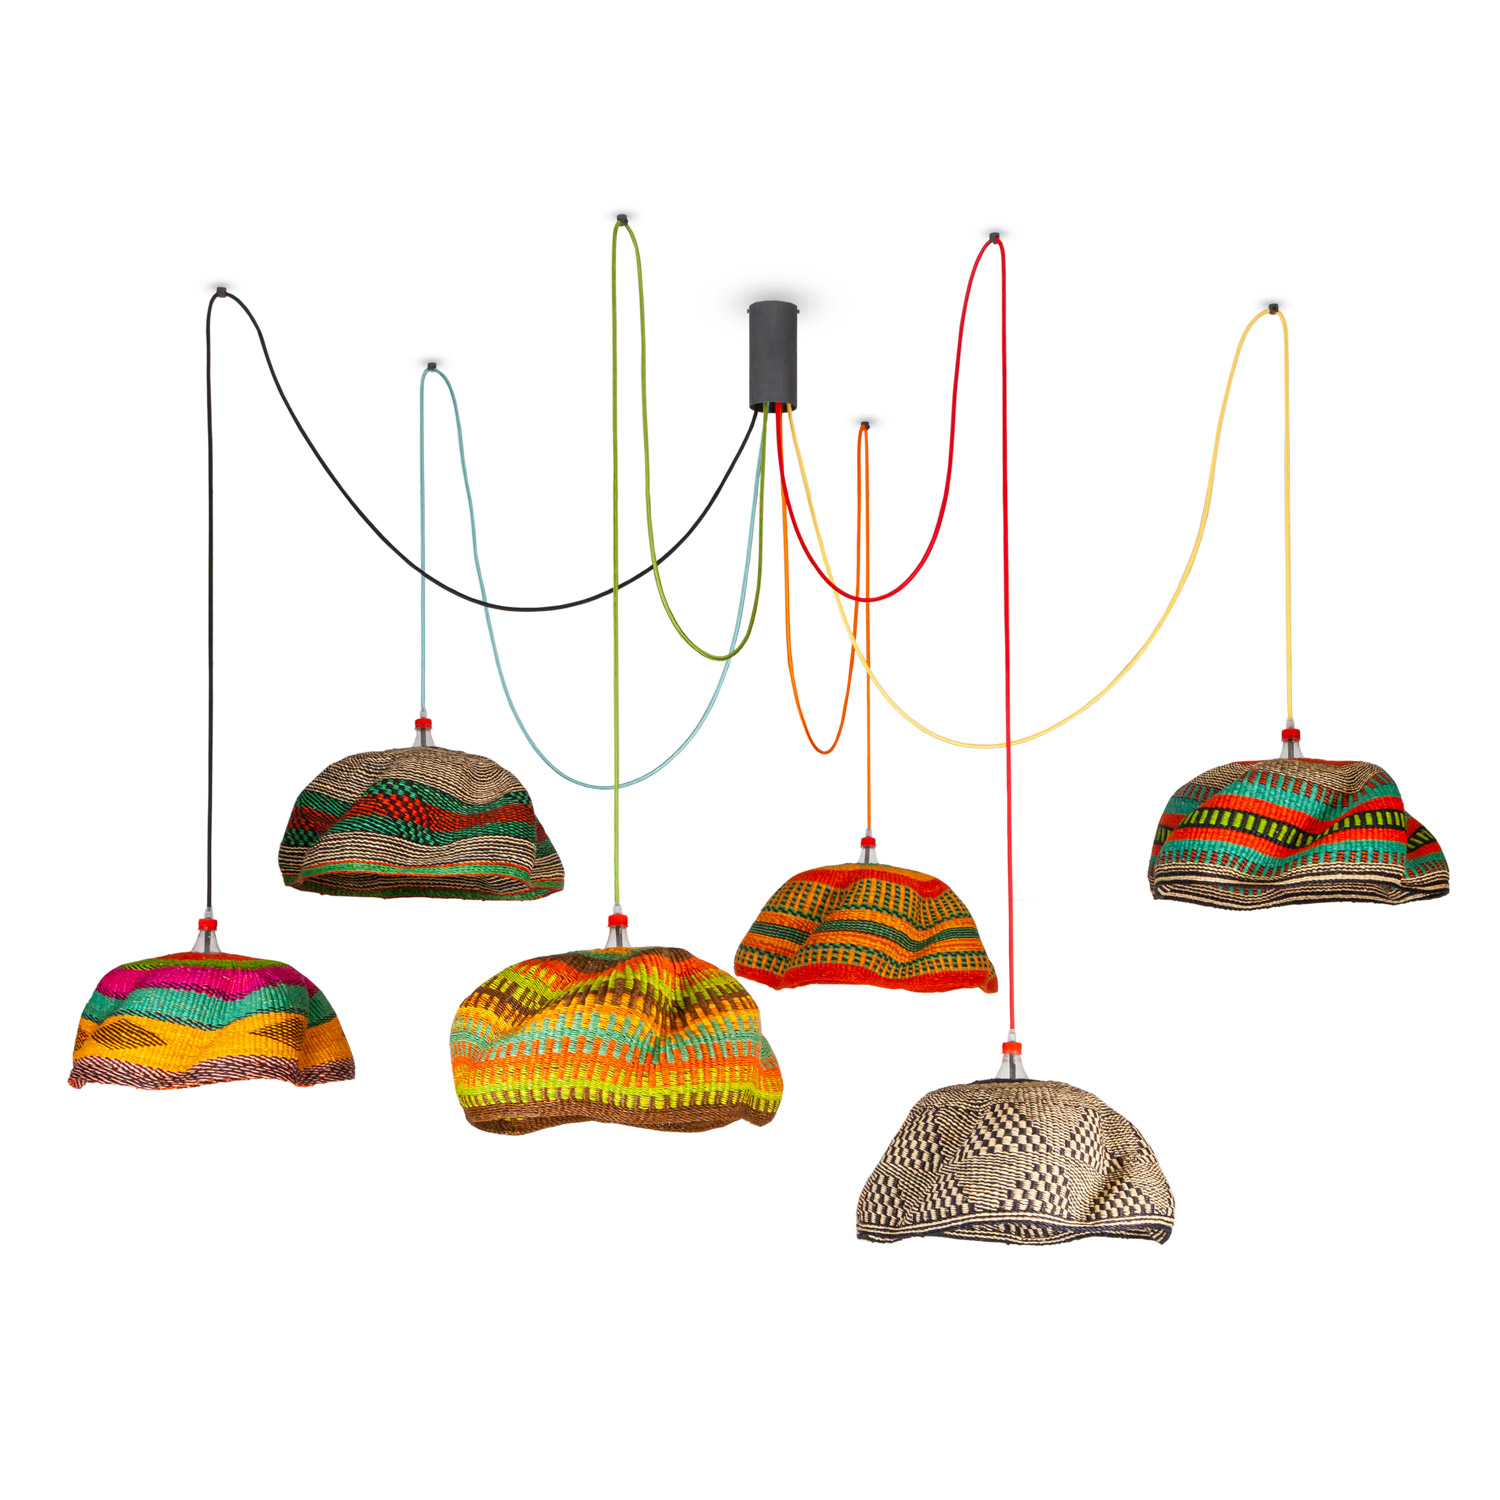 Bolgatanga PET Lamp - A Woven Lamp Collection By Baba Tree Basket And ...